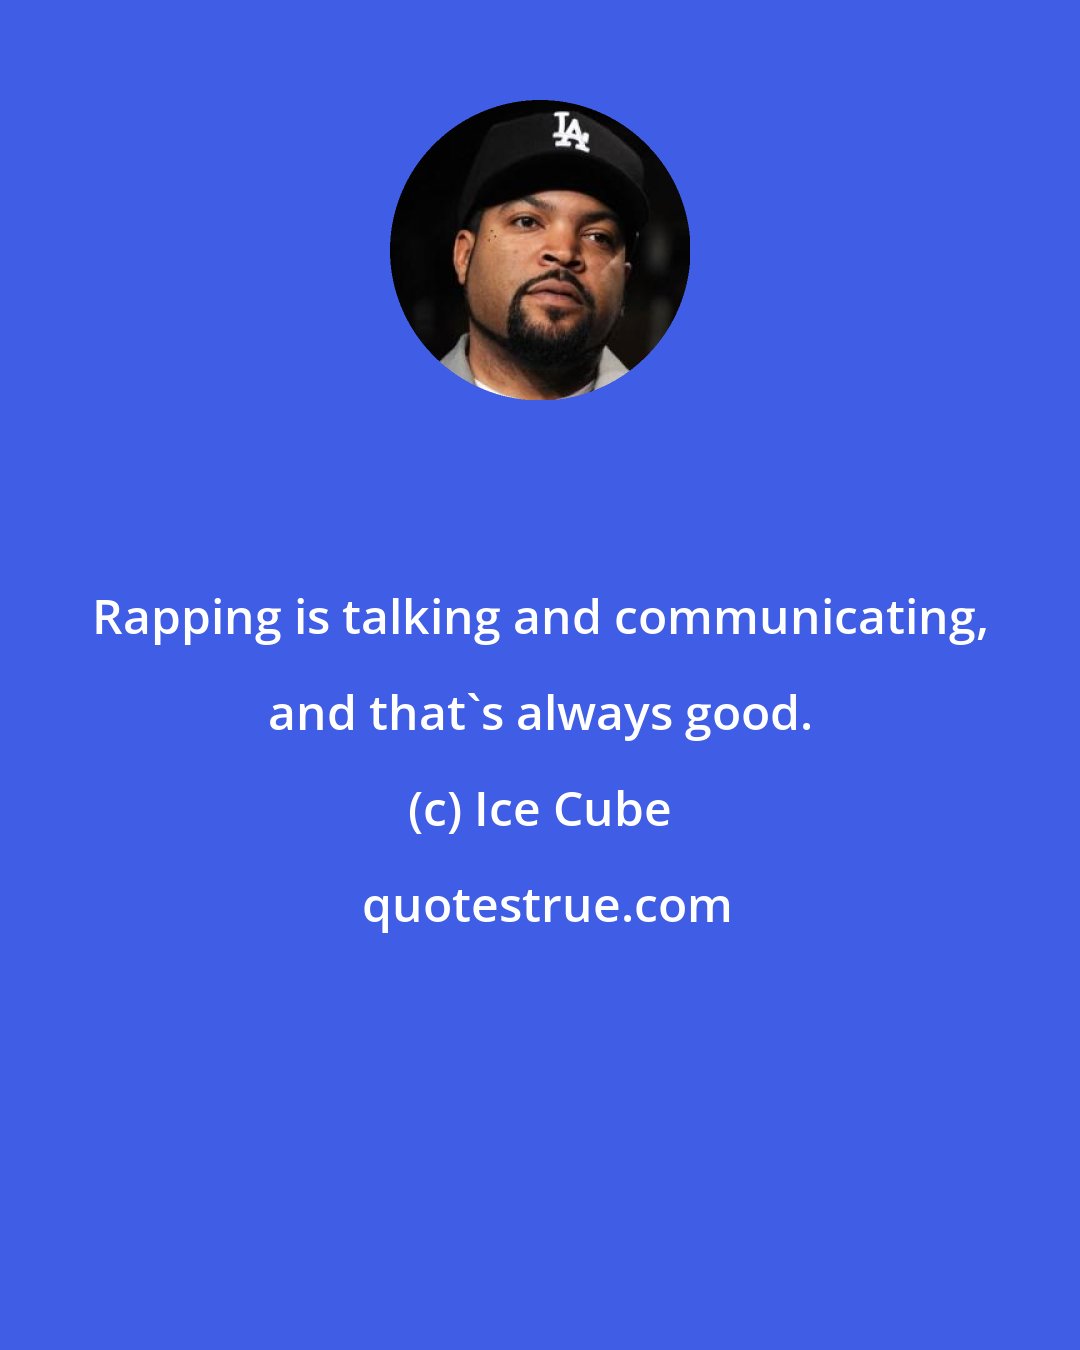 Ice Cube: Rapping is talking and communicating, and that's always good.